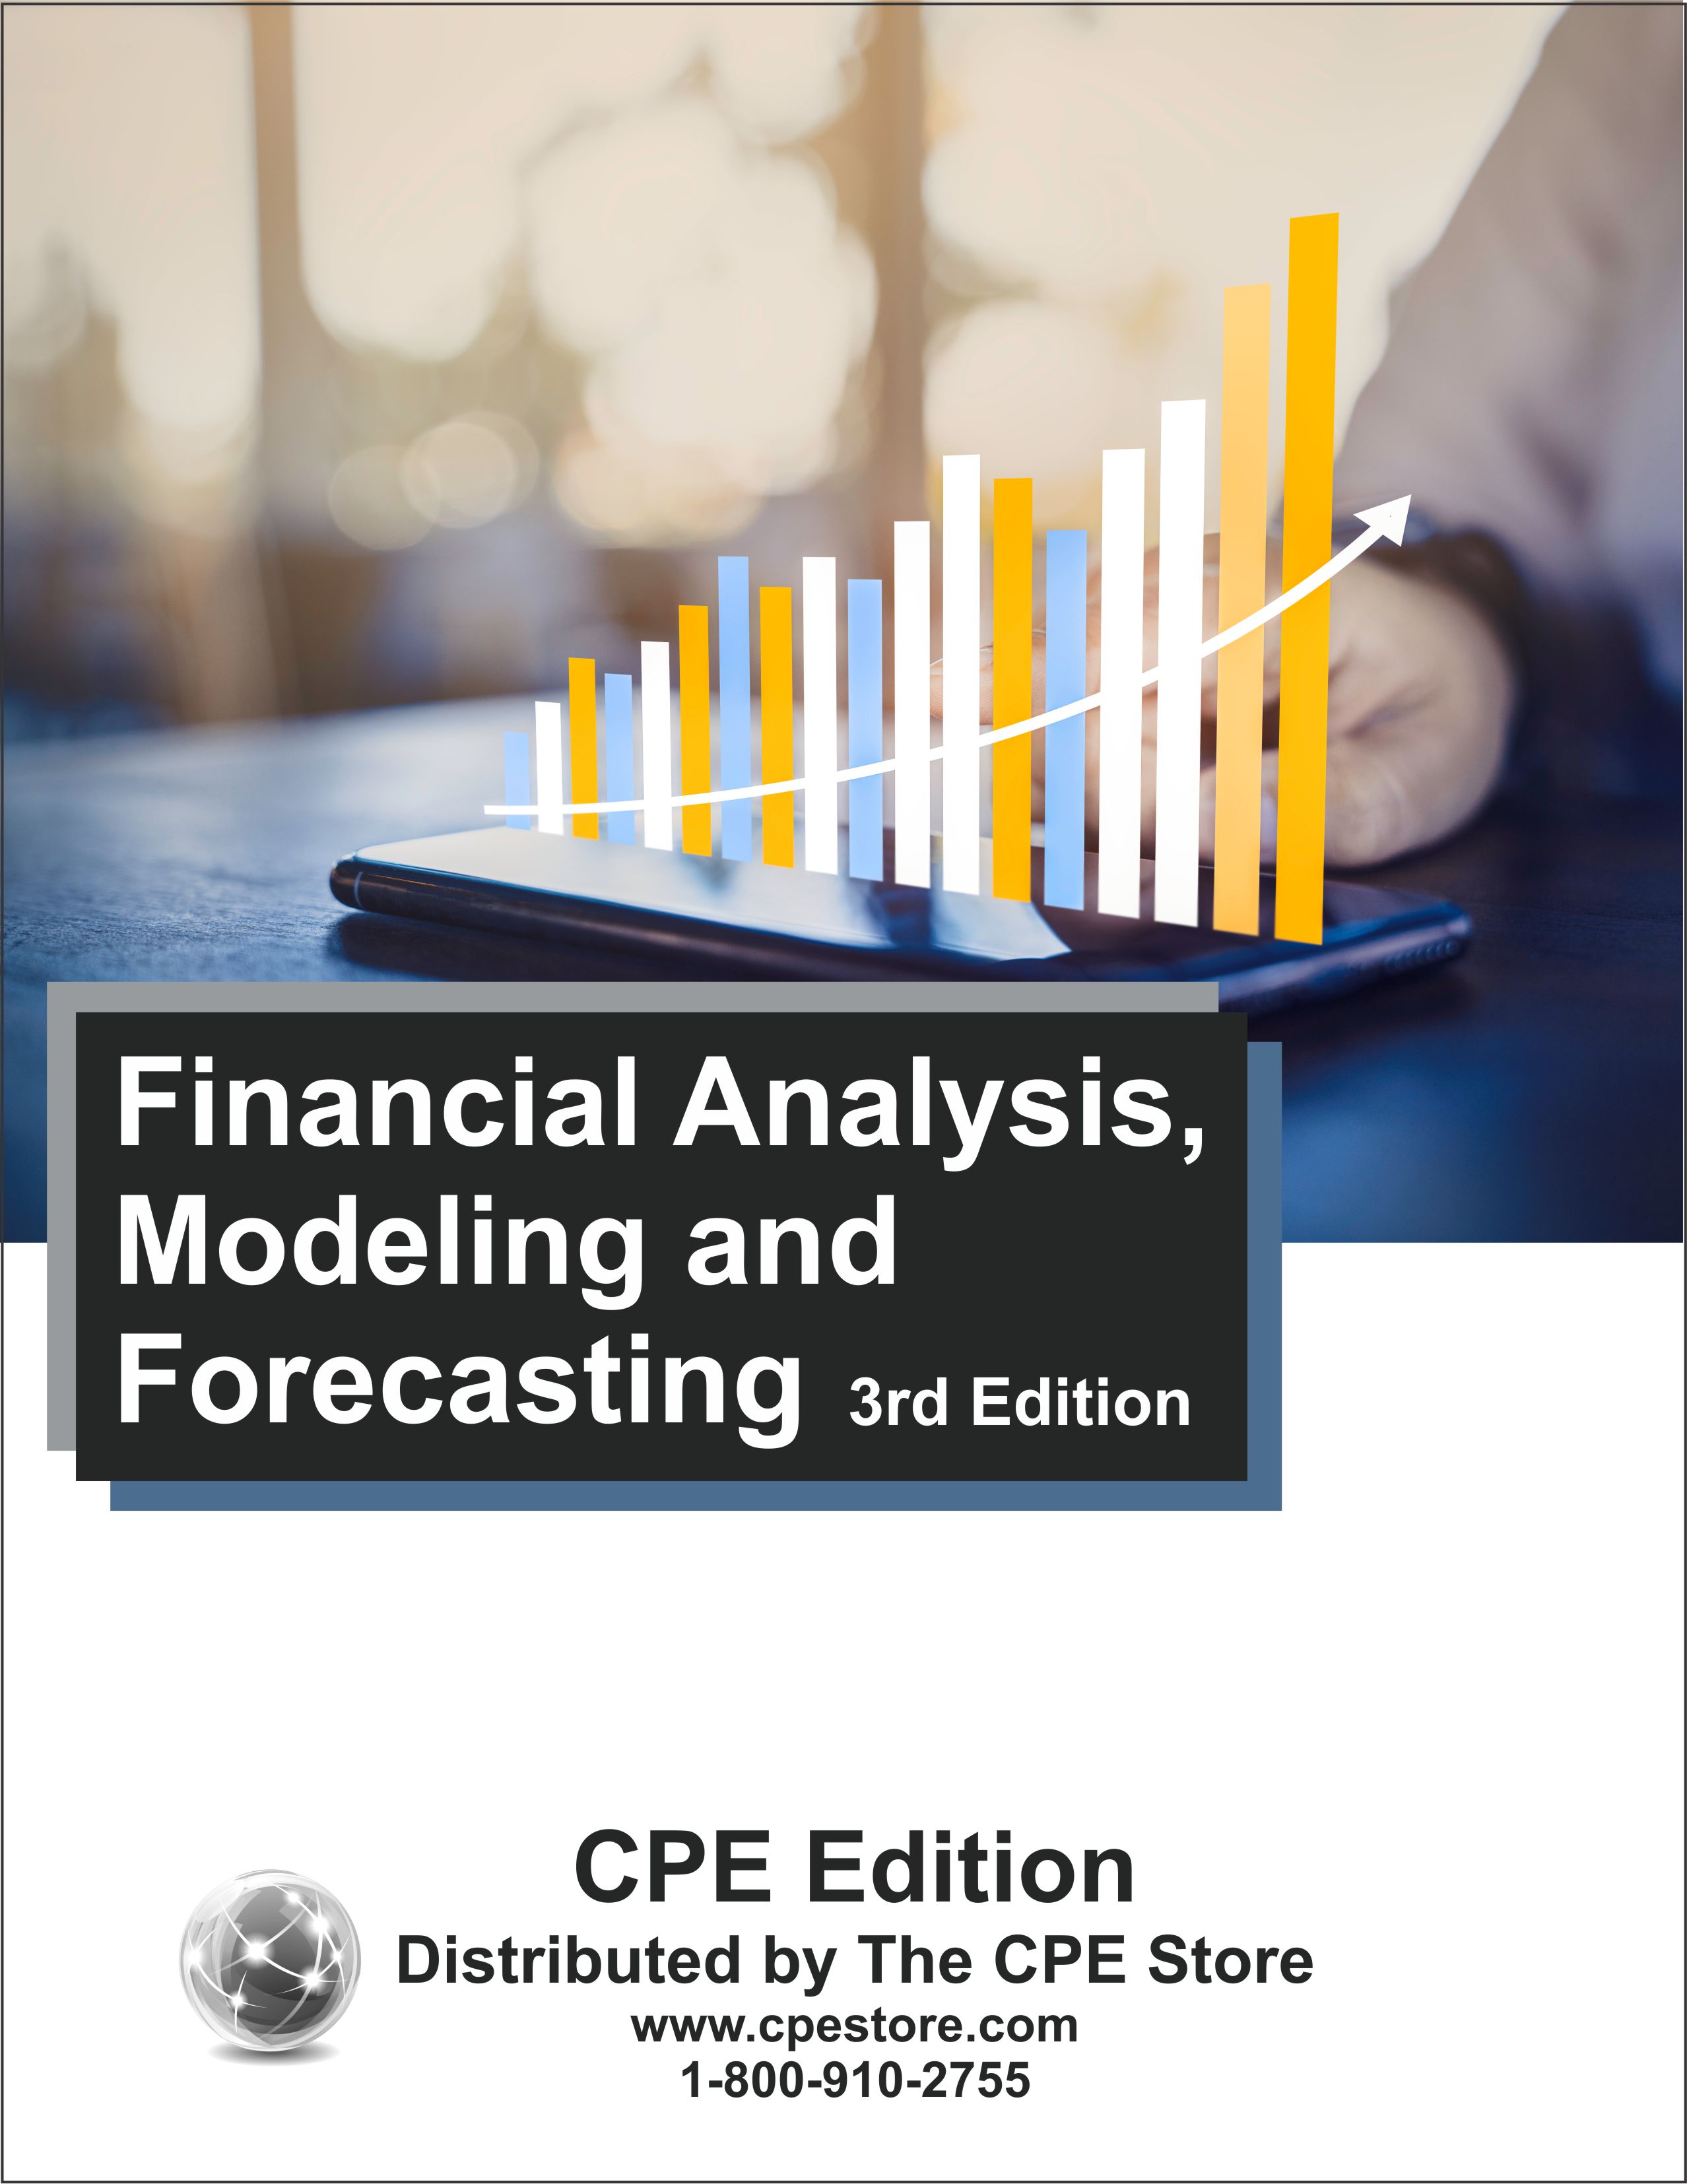 Financial Analysis, Modeling and Forecasting